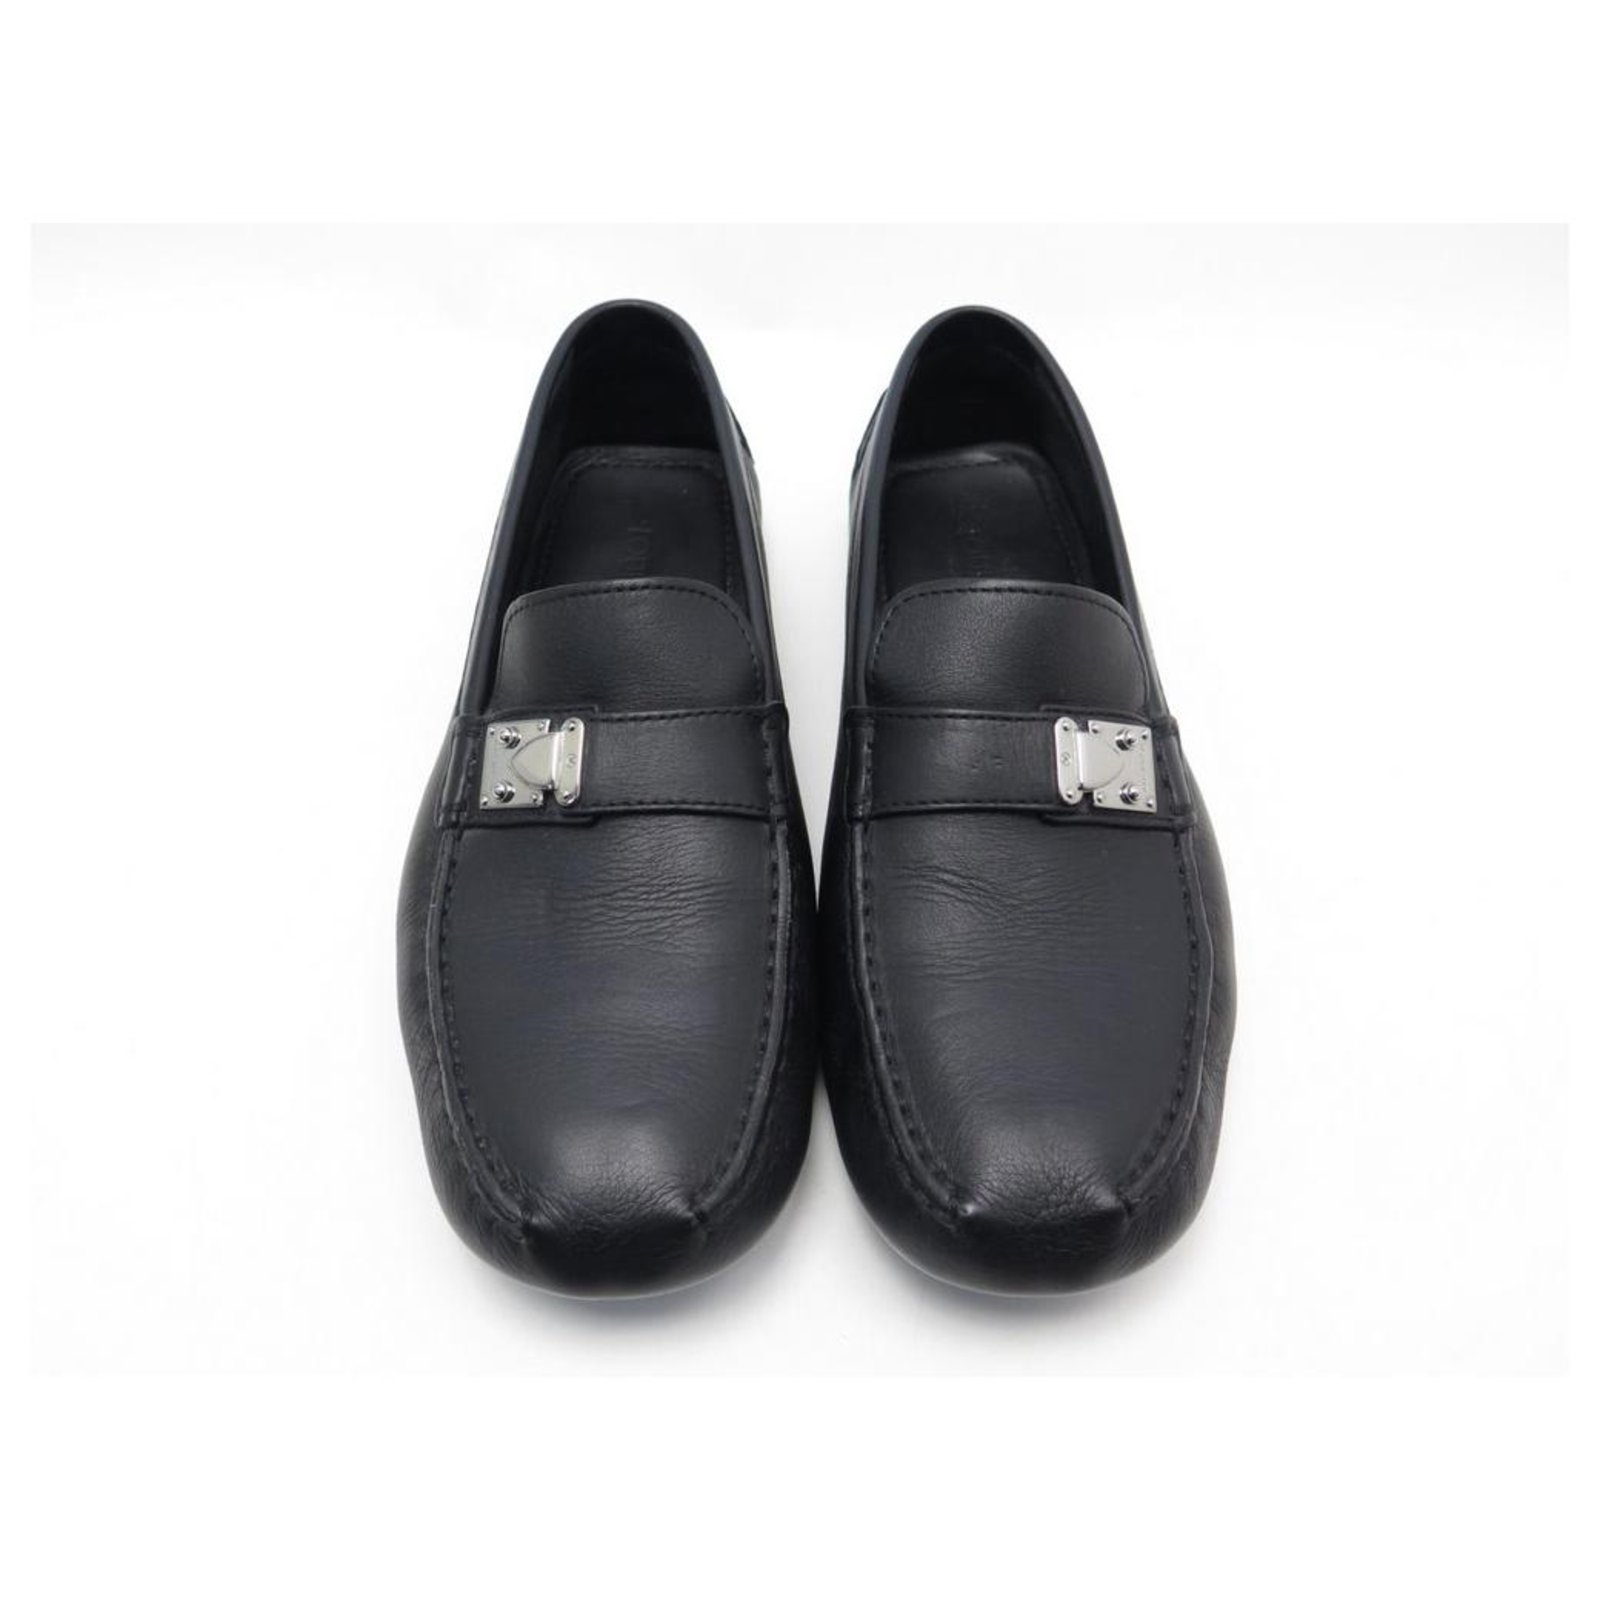 NEW LOUIS VUITTON LOAFERS 9 43 SMALL TRUNK CLASP LOAFERS Black